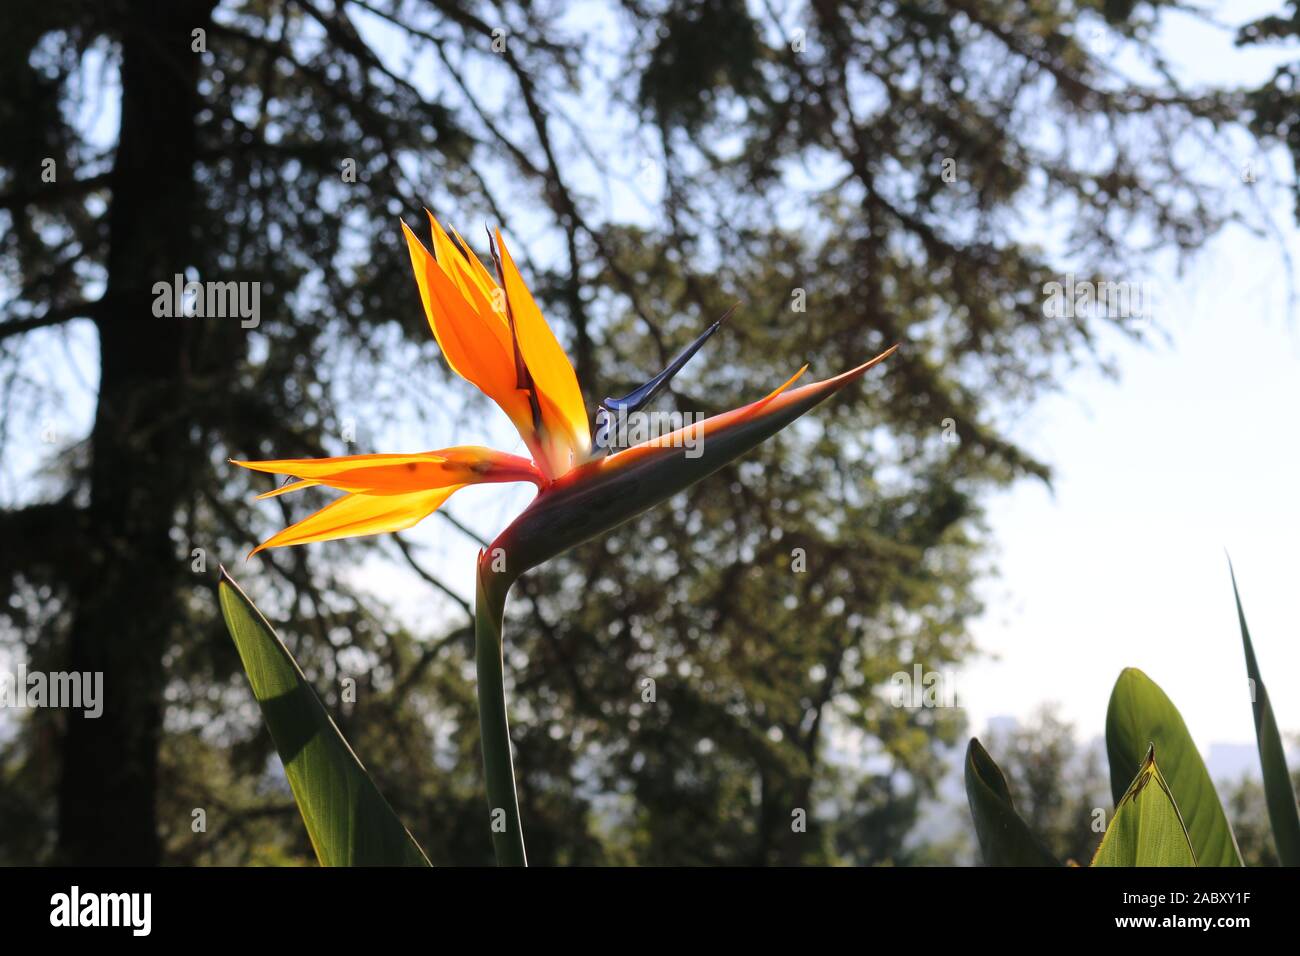 A bird of paradise flower taken at the Greystone Mansion in Beverly Hills. Stock Photo